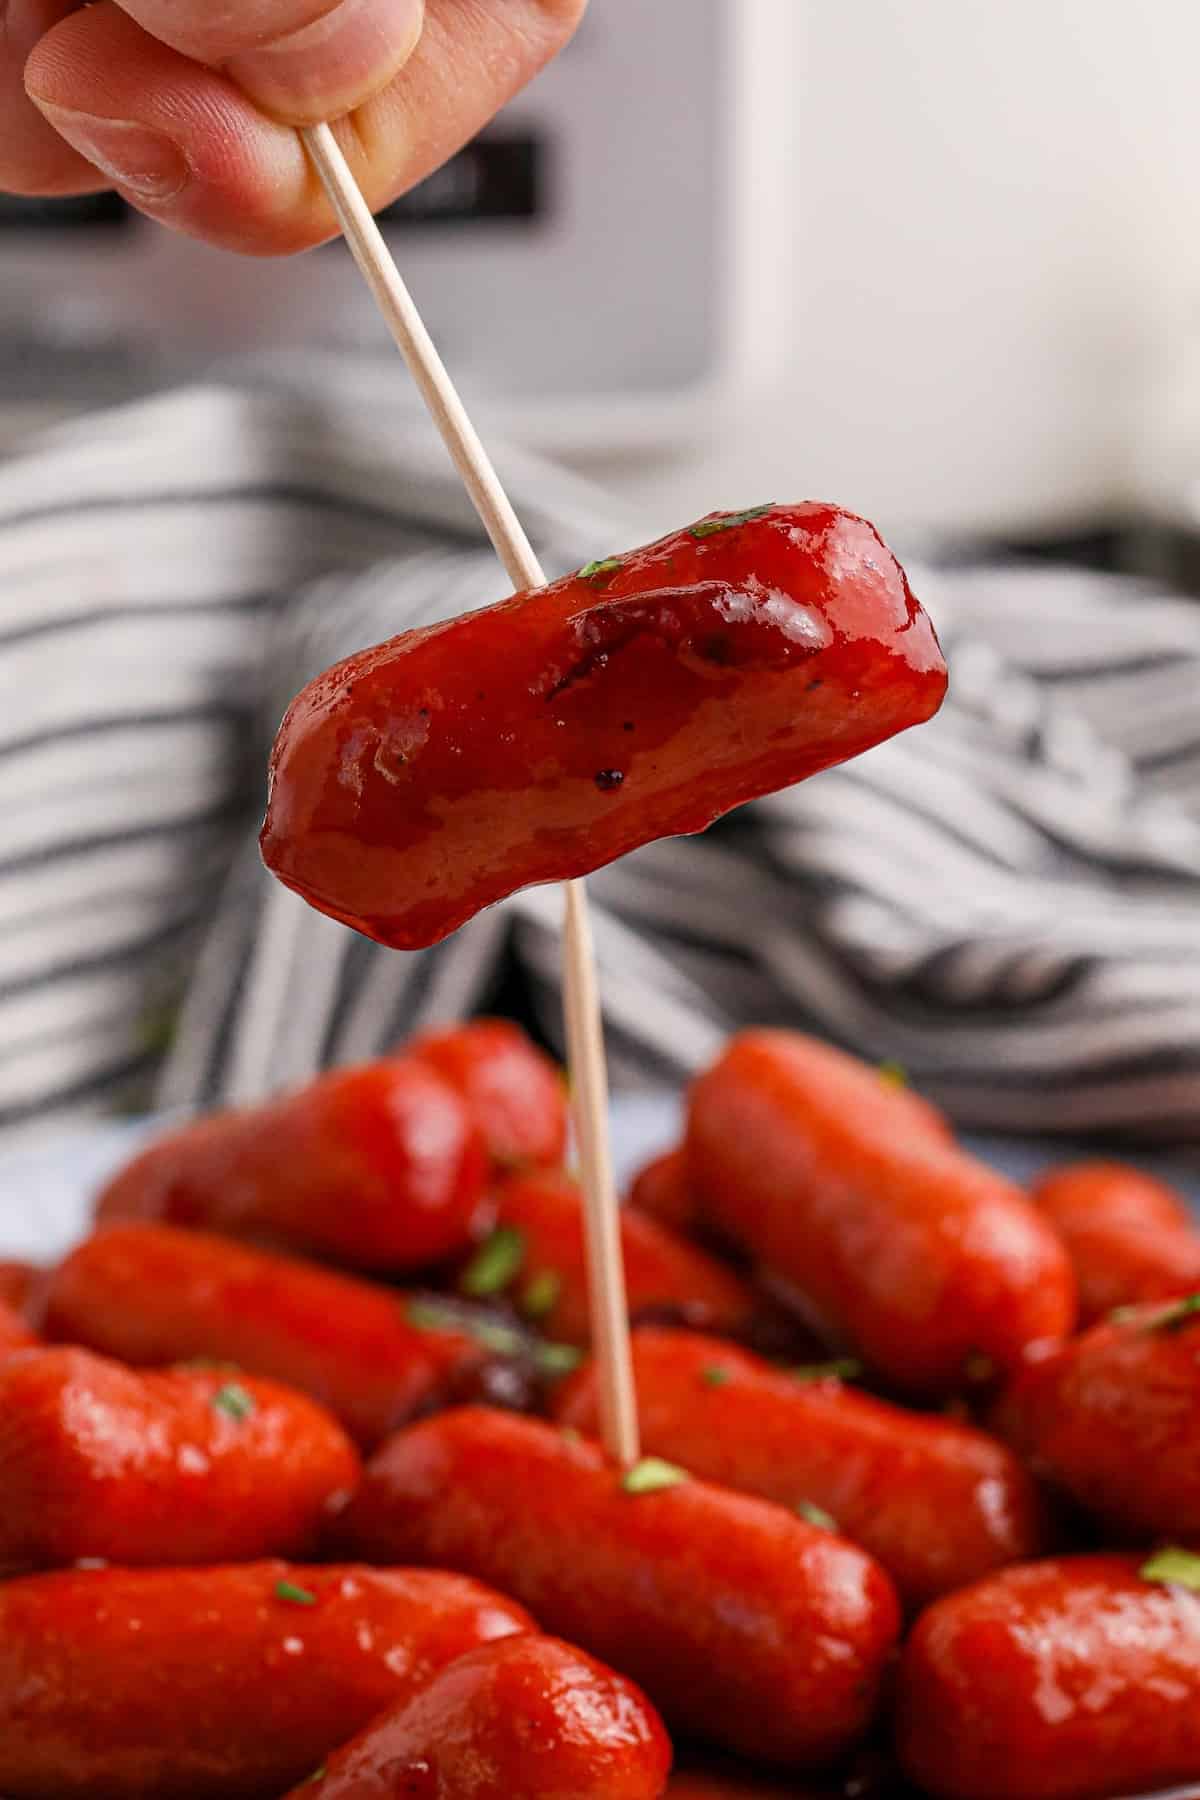 Picking up a slow cooker cranberry smoky with a skewer.